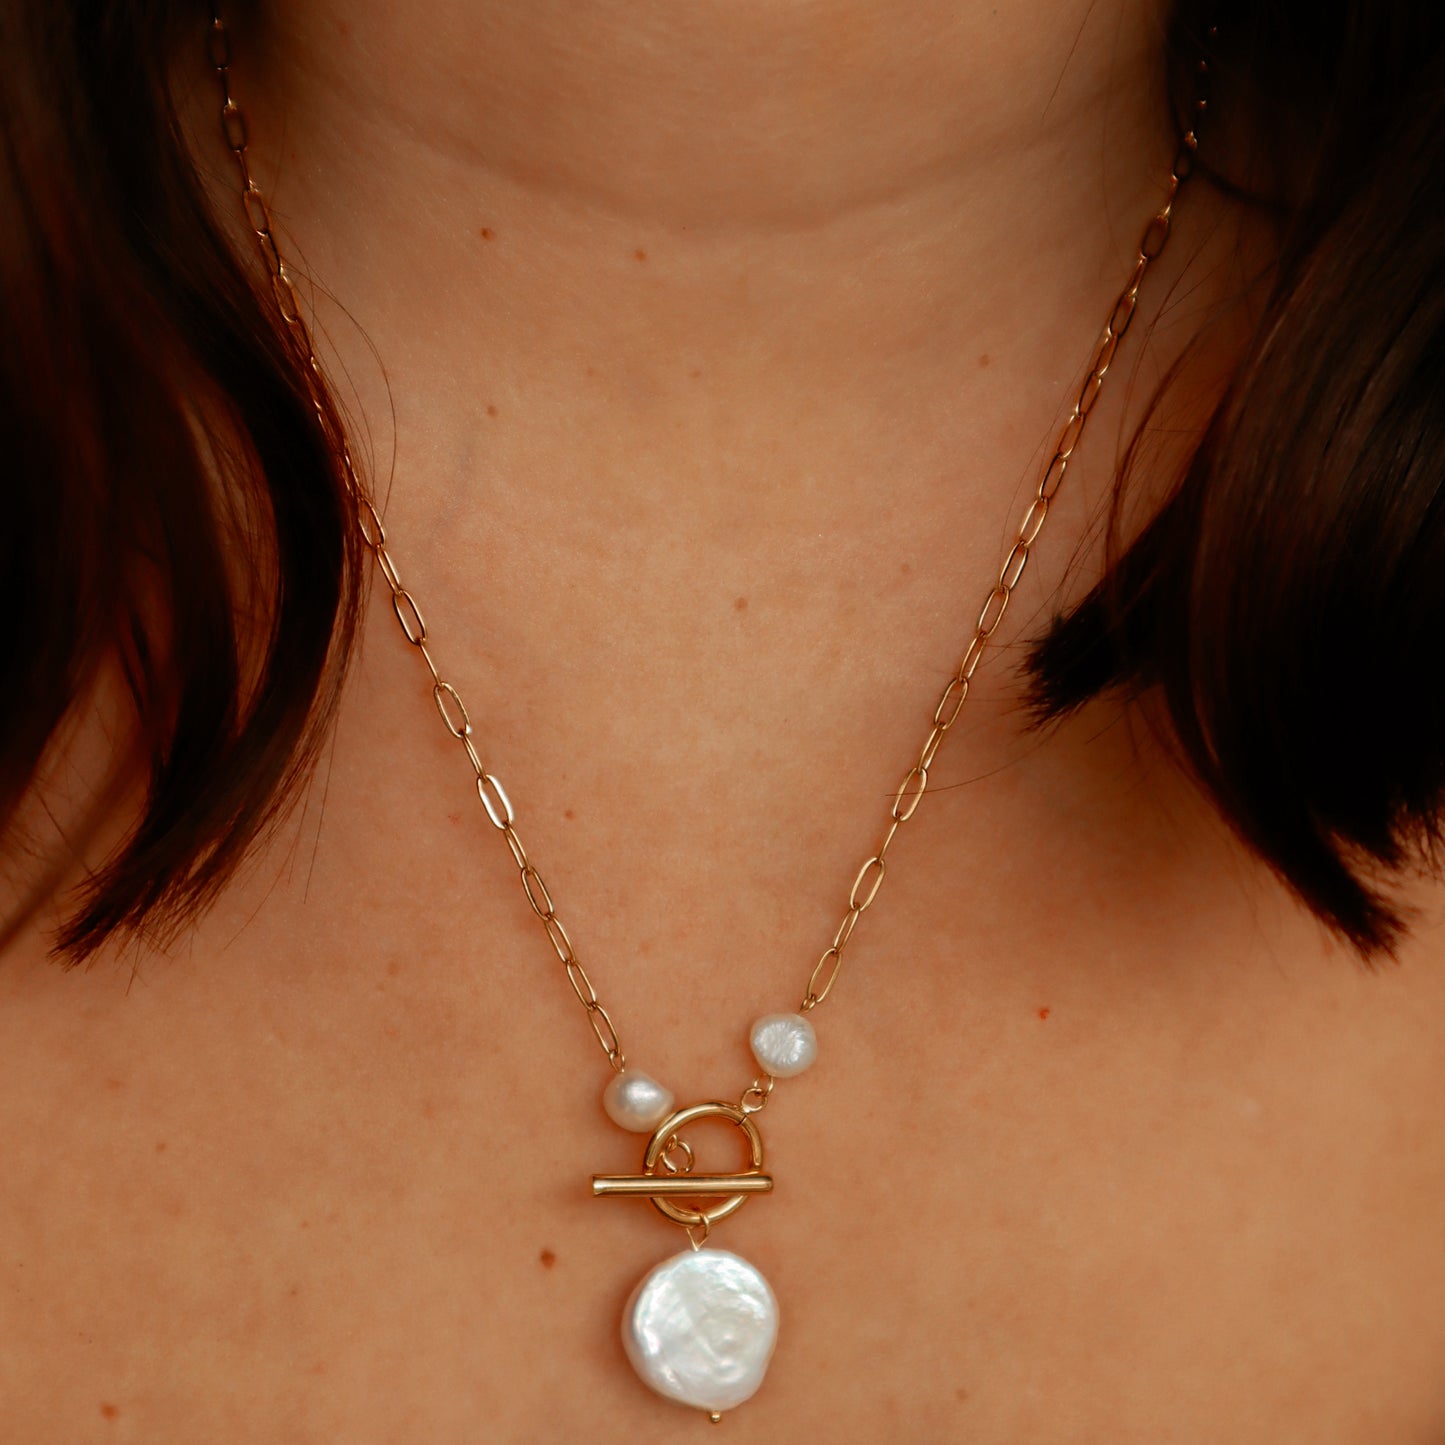 The Seychelles Necklace